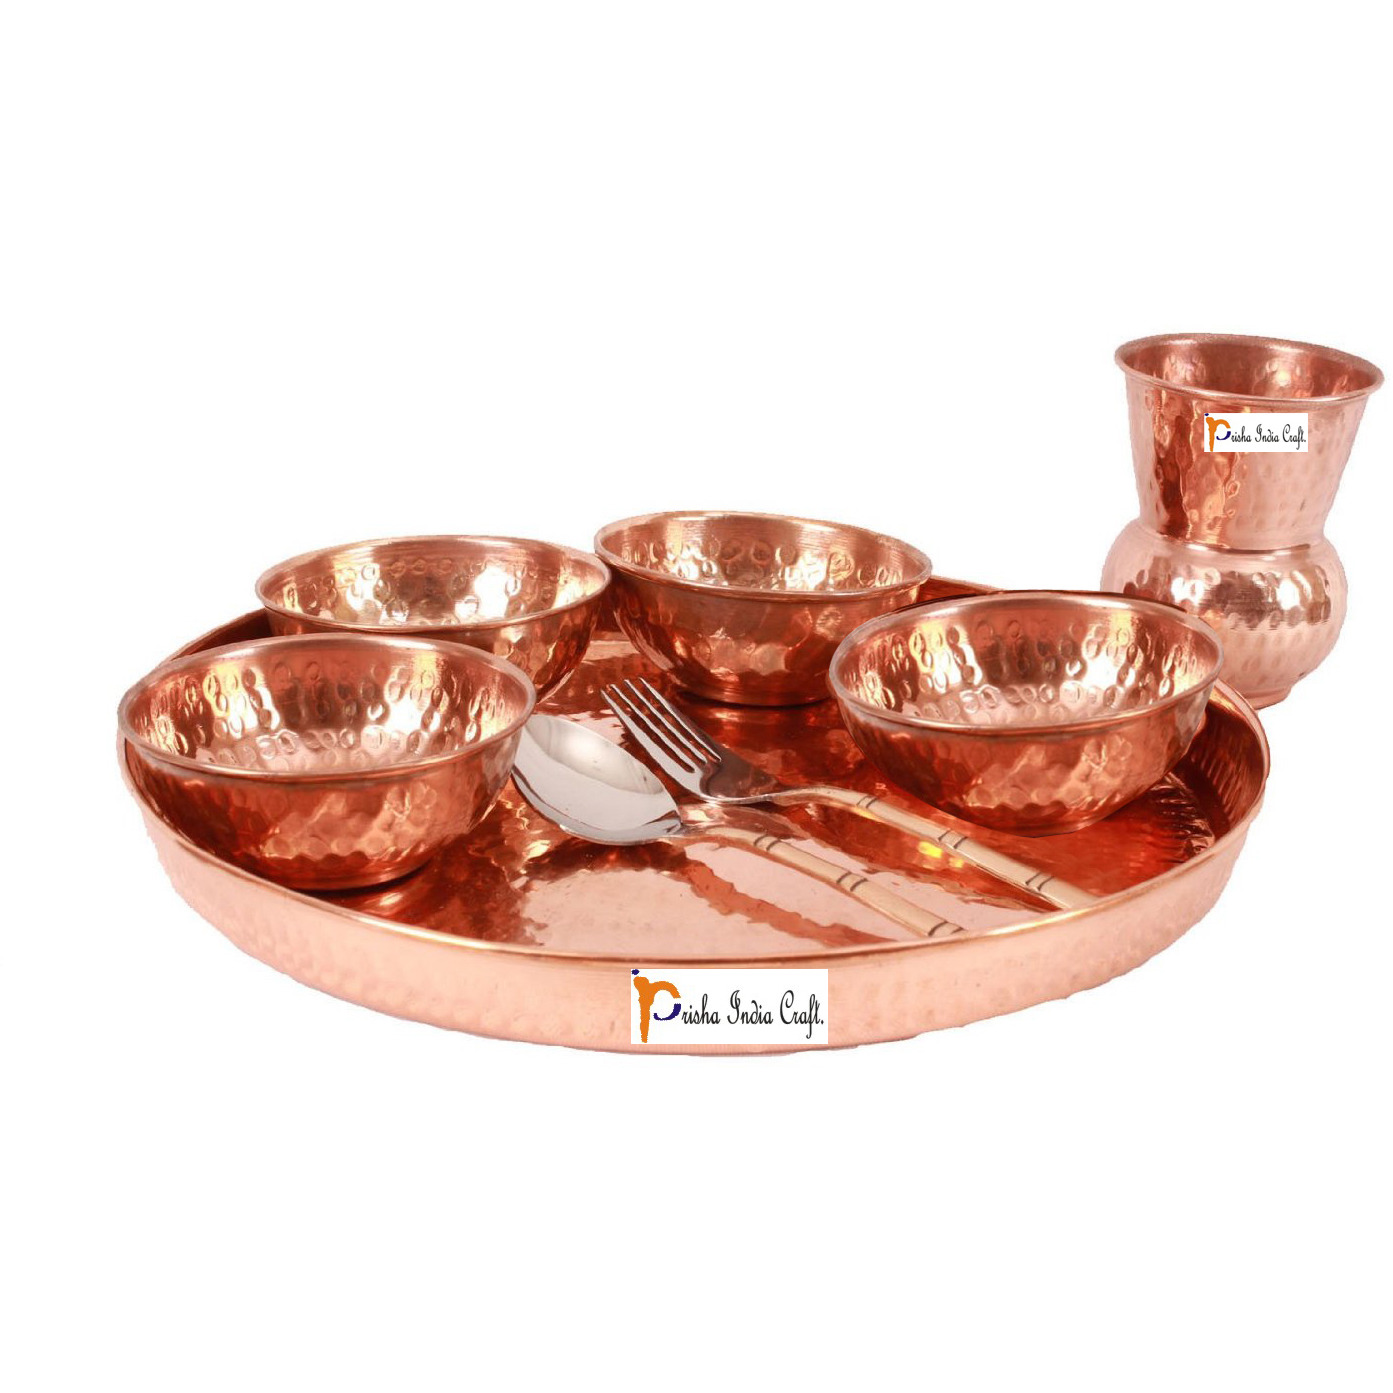 Prisha India Craft B. Set of 3 Dinnerware Traditional 100% Pure Copper Dinner Set of Thali Plate, Bowls, Glass and Spoon, Dia 12  With 1 Luxury Style Stainless Steel Copper Pitcher Jug - Christmas Gift